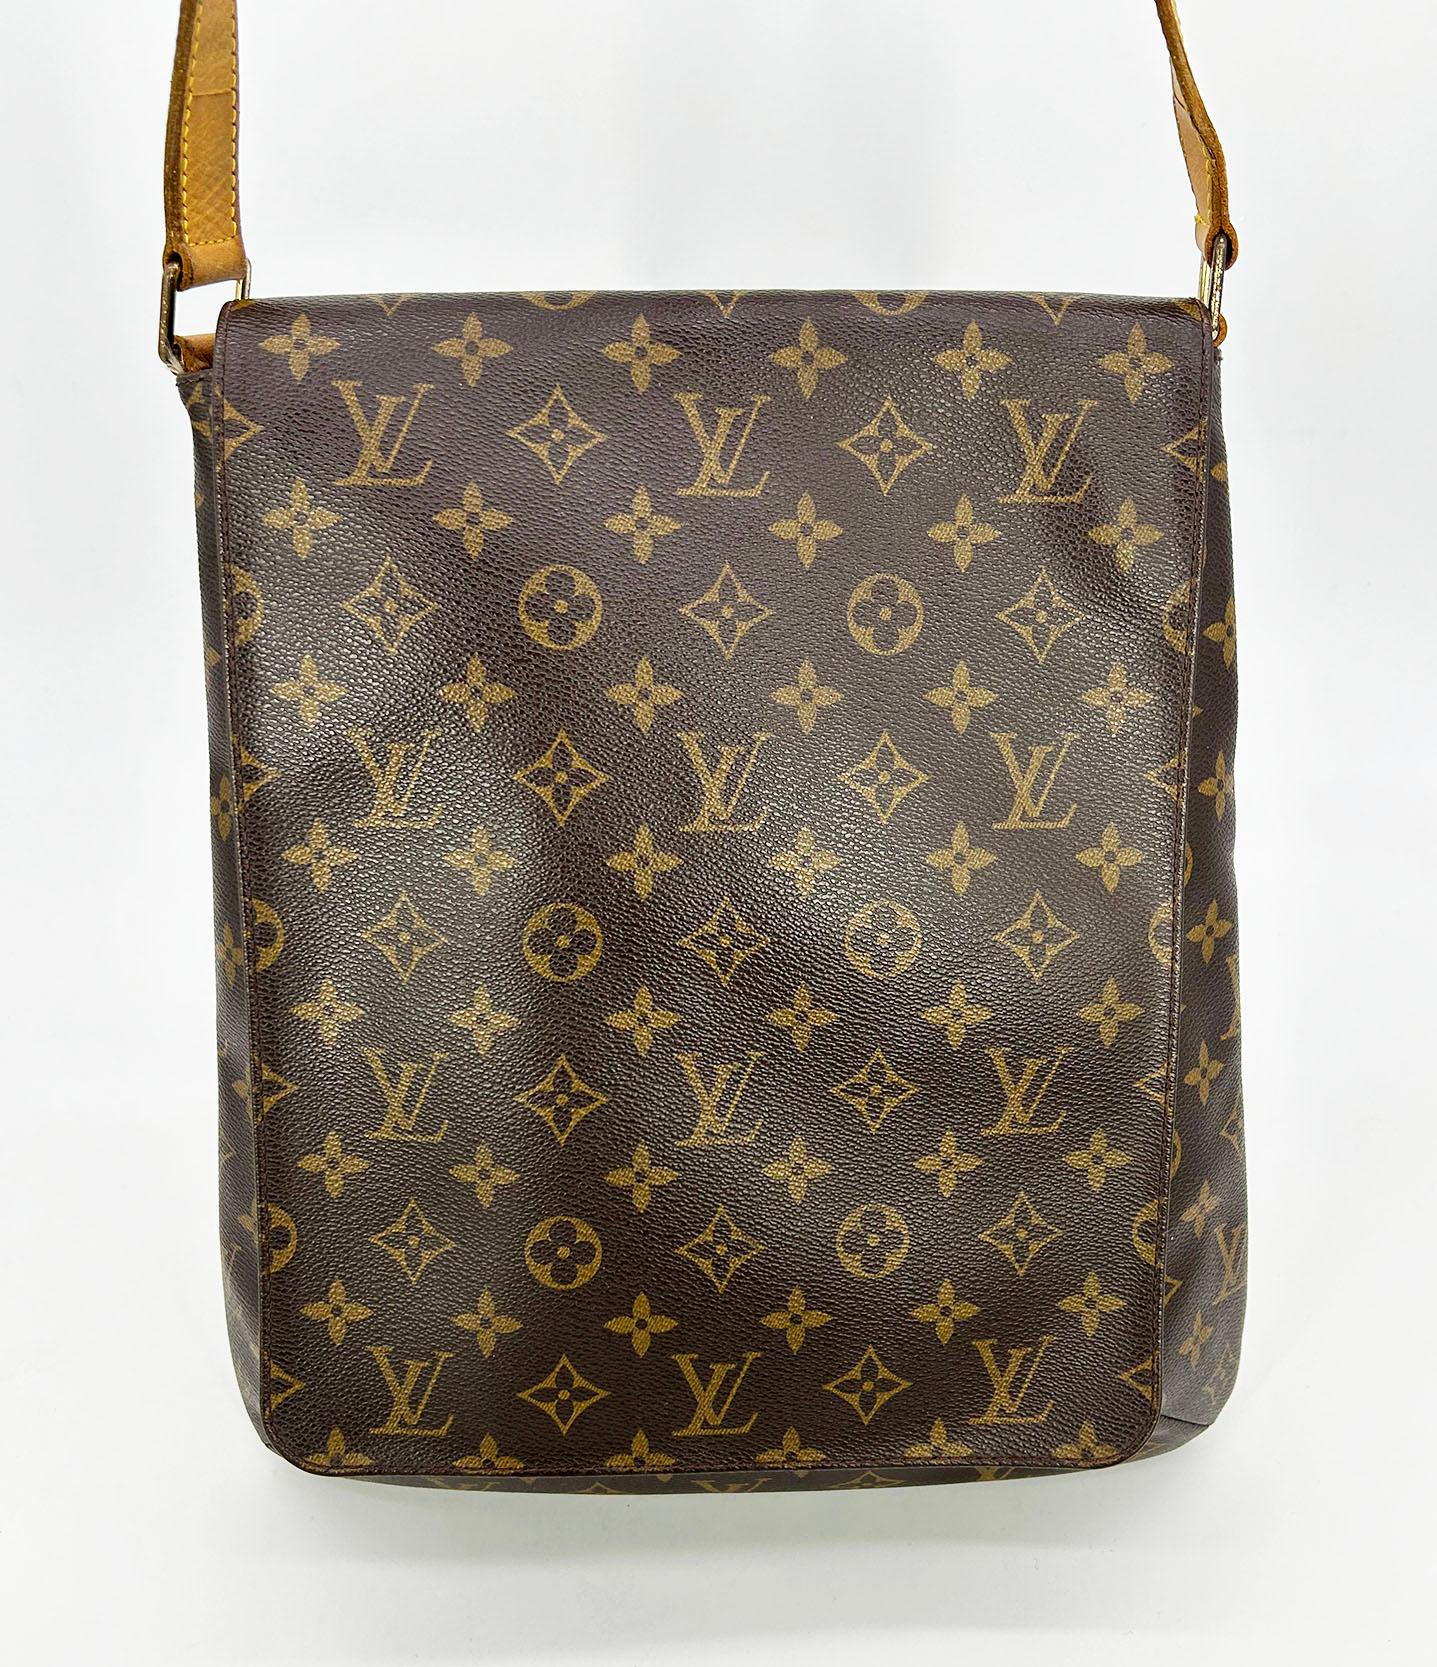 Louis Vuitton Monogram Mussette Salsa GM in good condition. Monogram canvas exterior trimmed with tan leather and gold brass hardware. Adjustable tan leather shoulder strap. Front flap closure opens to a golden microsuede lined interior with one